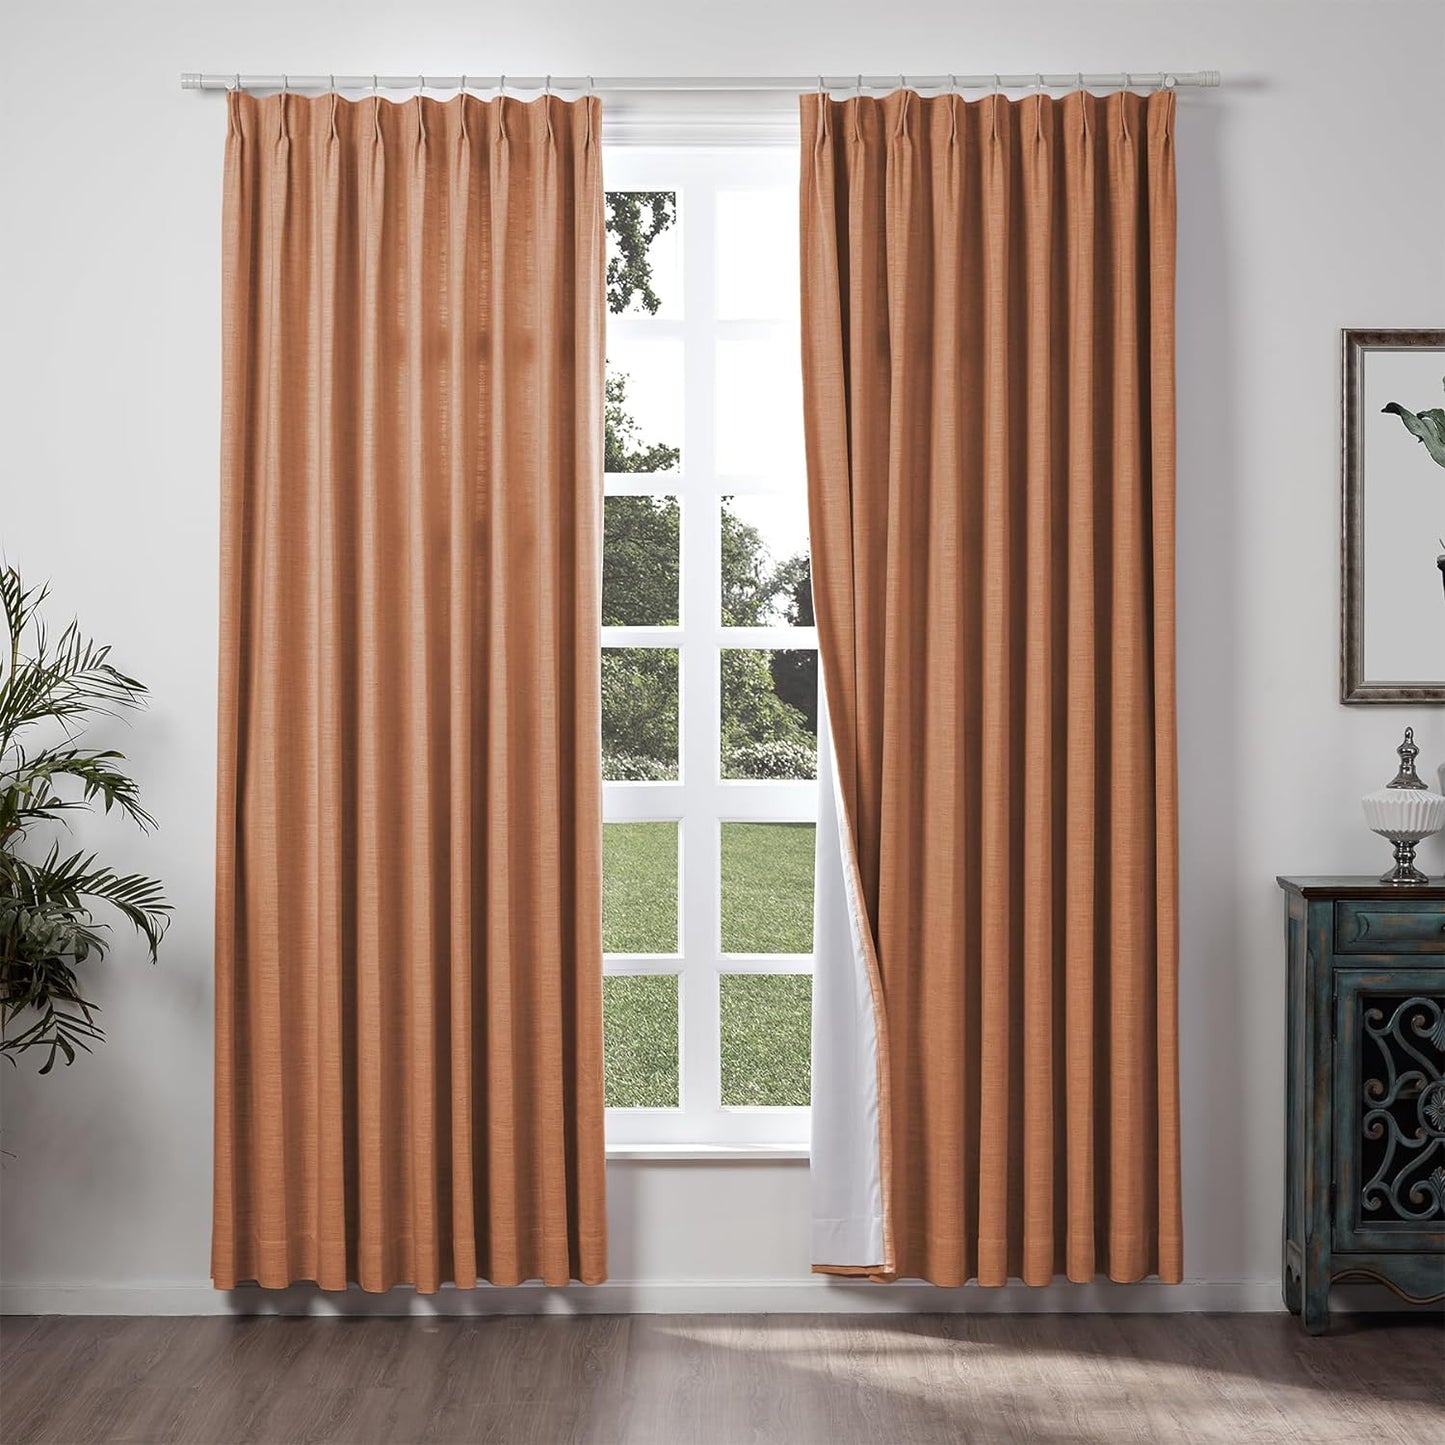 Chadmade 50" W X 63" L Polyester Linen Drape with Blackout Lining Pinch Pleat Curtain for Sliding Door Patio Door Living Room Bedroom, (1 Panel) Sand Beige Tallis Collection  ChadMade Orange Copper (26) 72Wx84L 